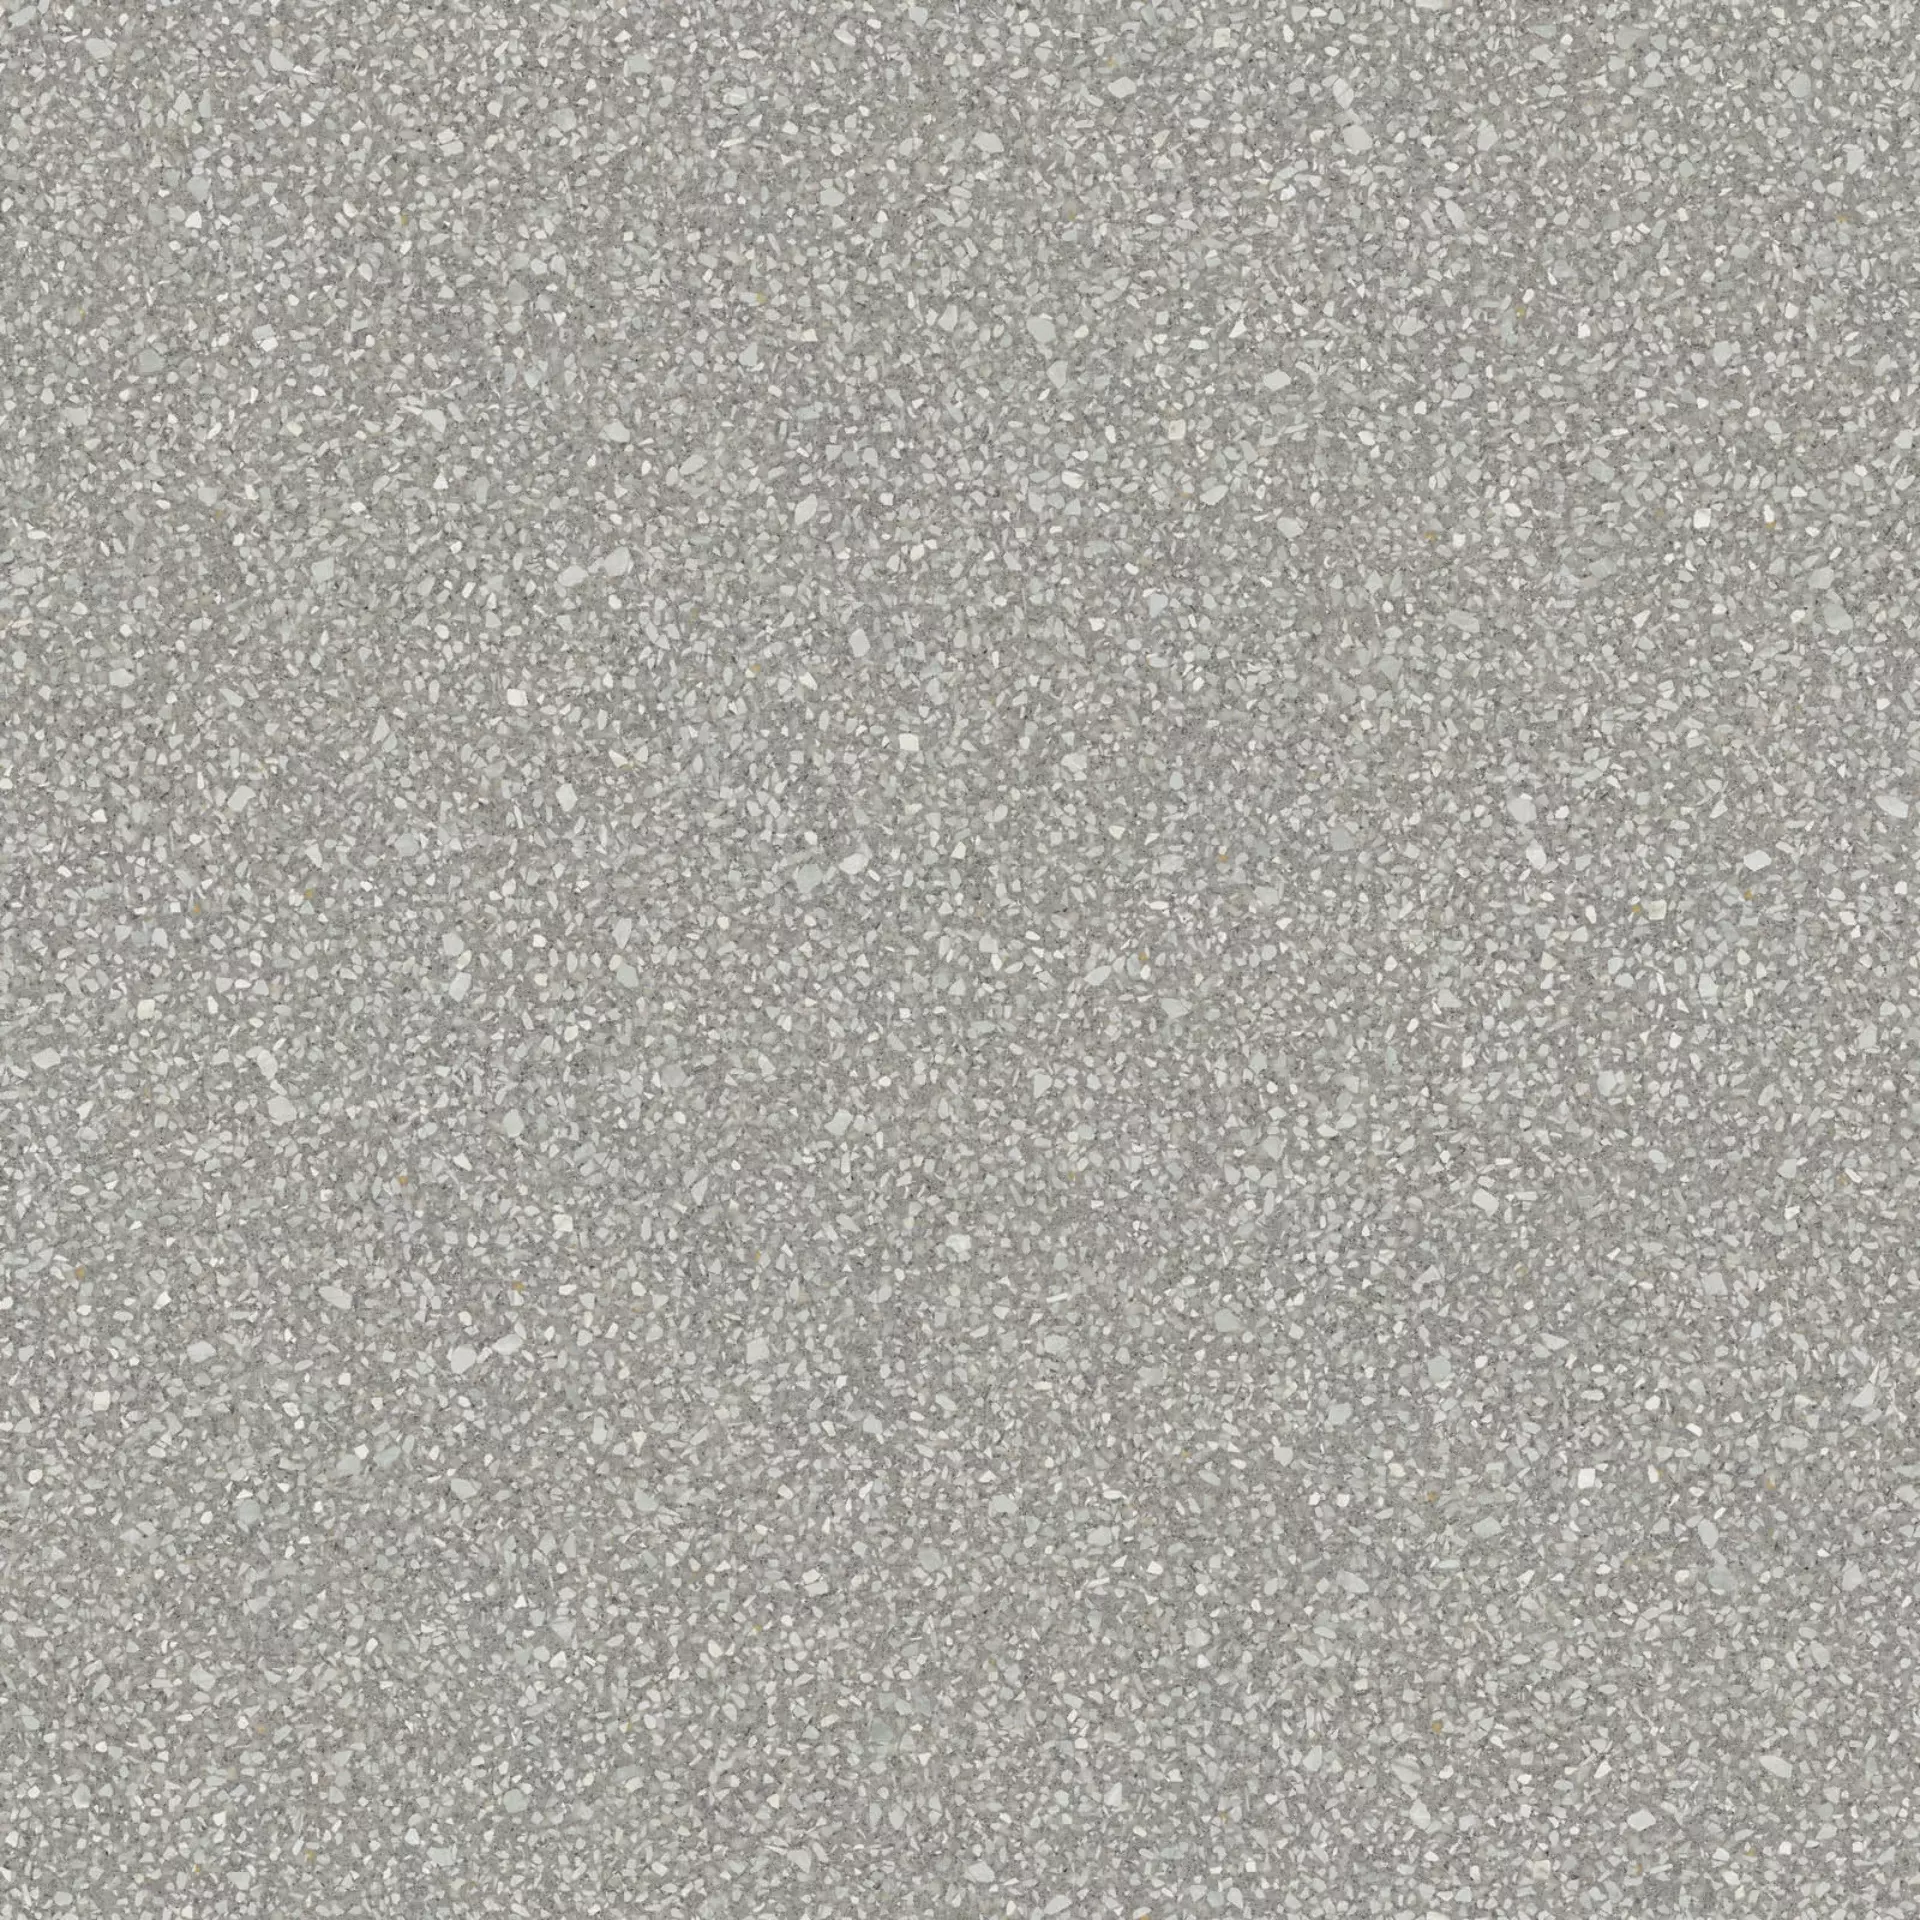 ABK Blend Dots Grey Naturale PF60005827 90x90cm rectified 8,5mm